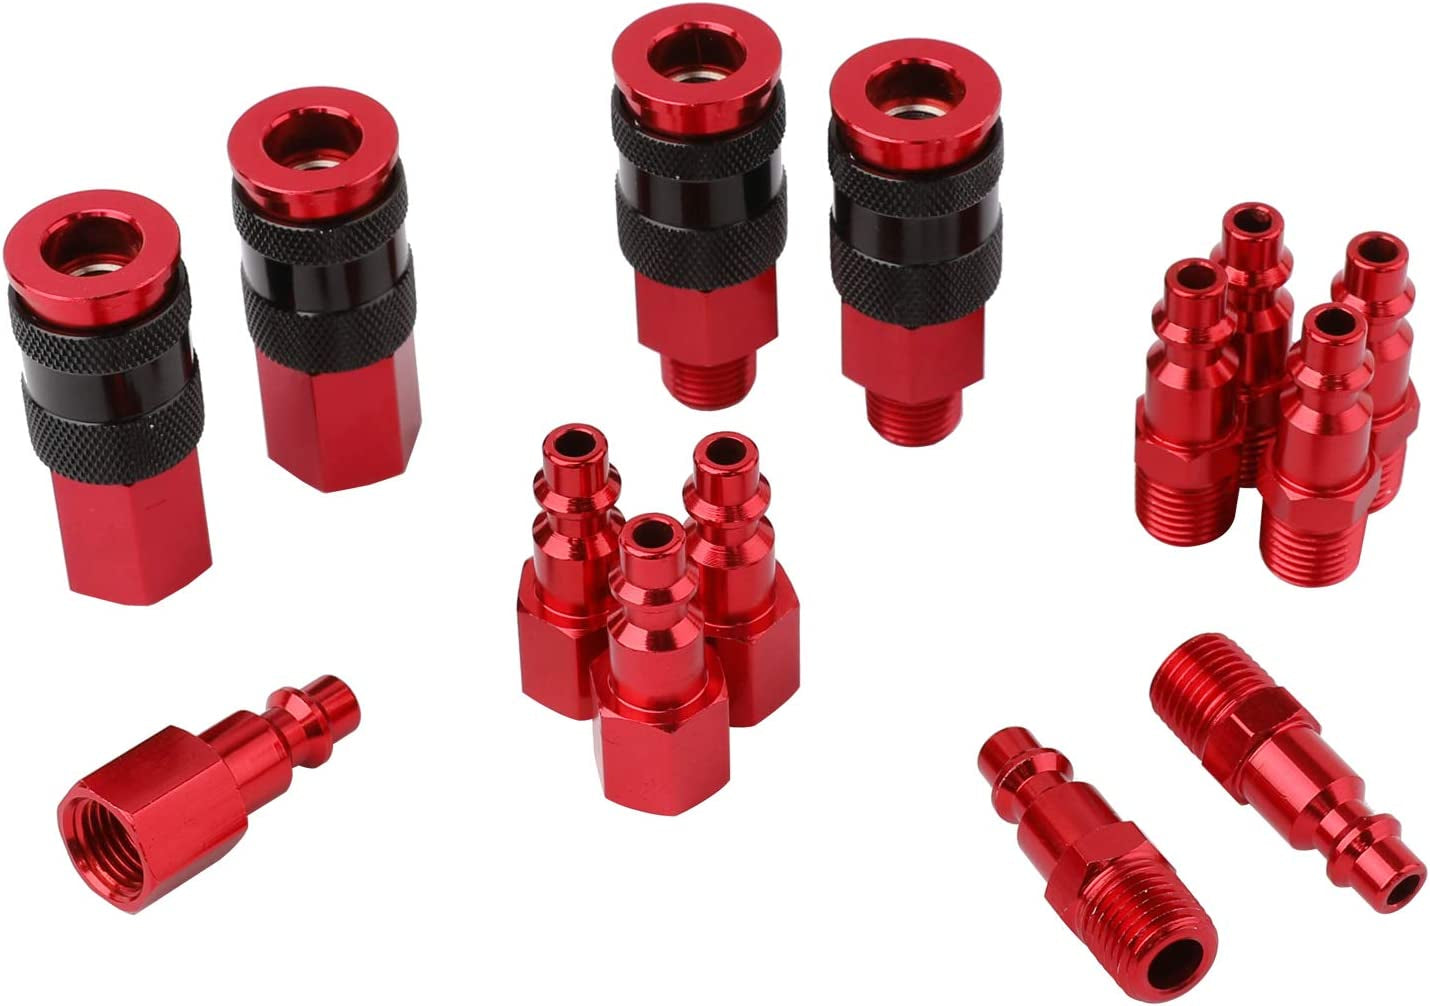  14 Pieces Universal Air Coupler and Industrial Air Plug Kit 1/4 Inch Threads and Body Size Air Compressor Accessories